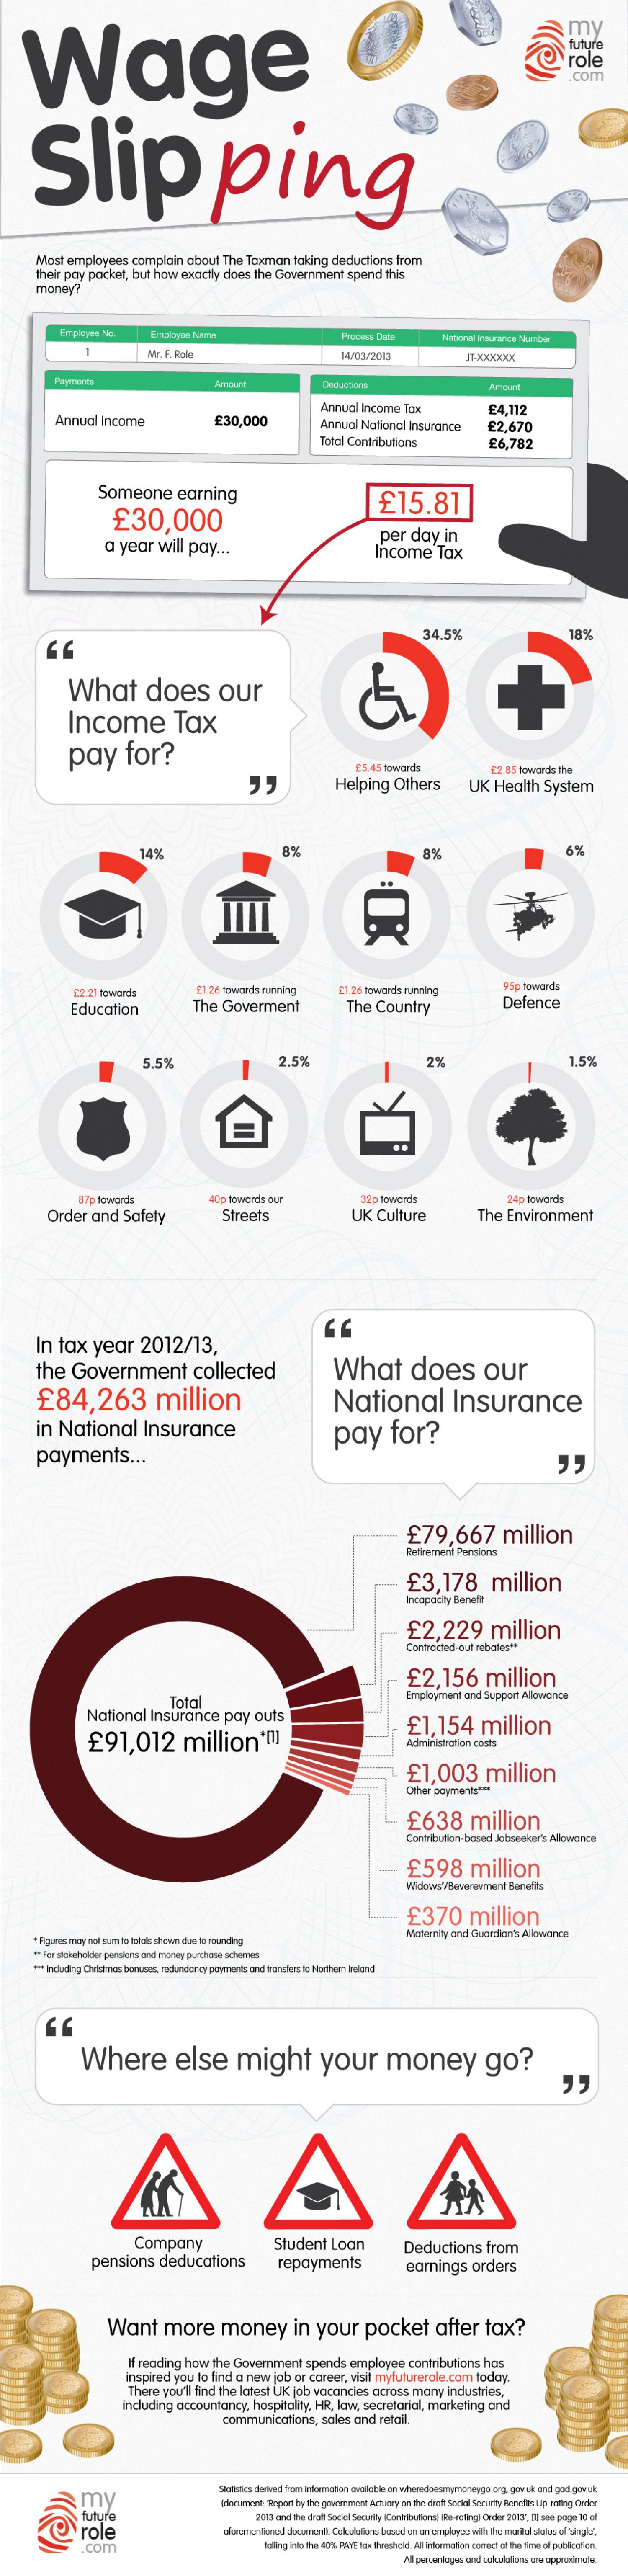 Wage Slipping: How Does the Government Spend Your Income Tax and National Insurance? Infographic